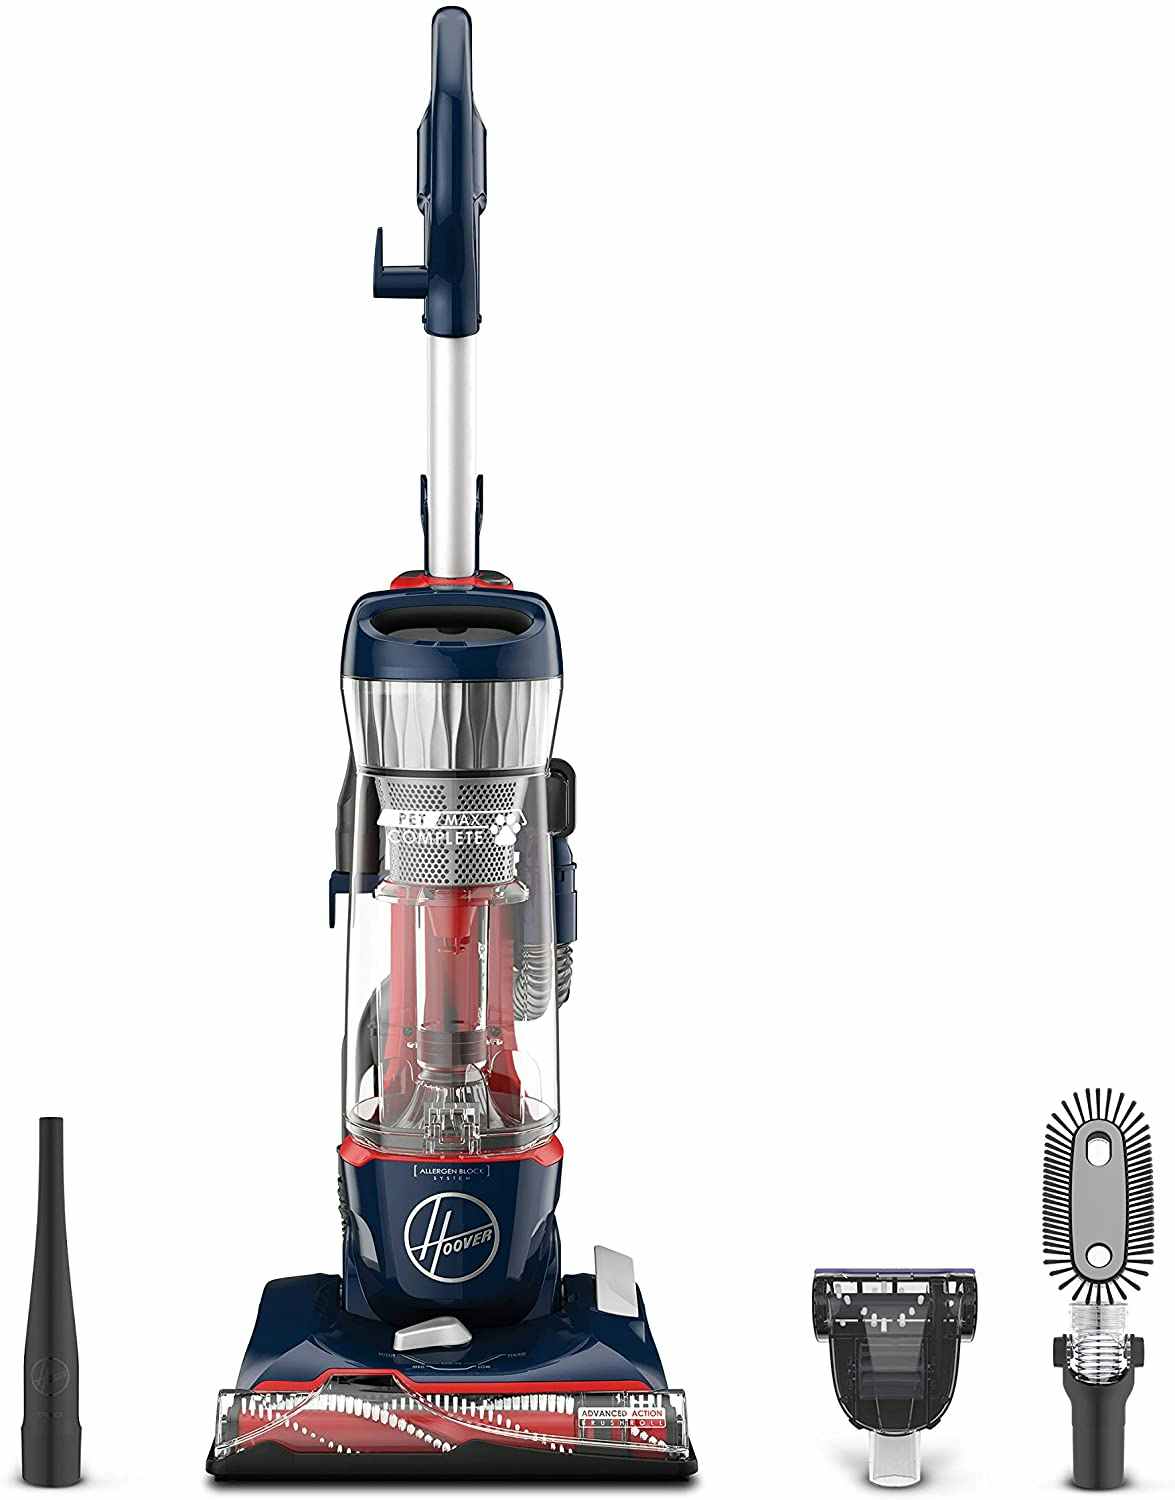 A blue Hoover vacuum with accessories placed to the side